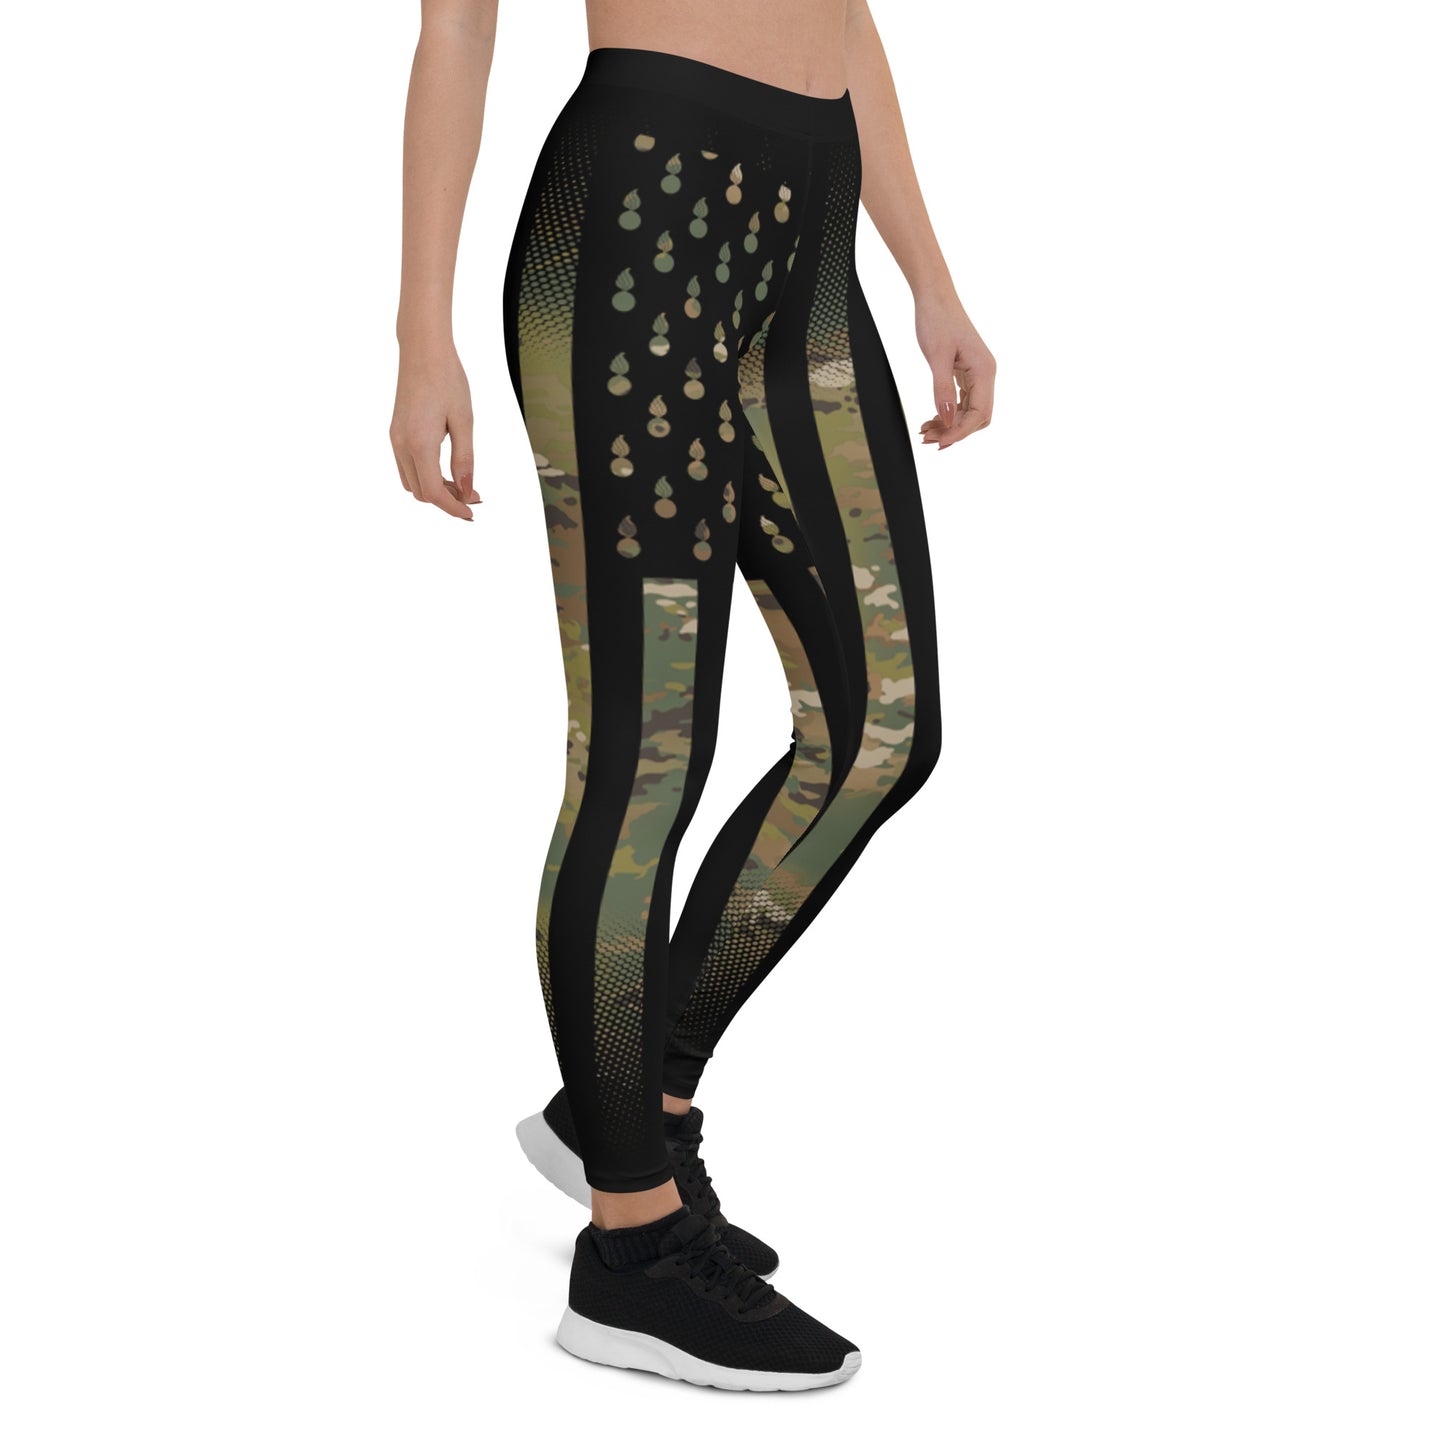 AMMO Black American Flag With Pisspots For Stars OCP Camouflage Pattern Leggings